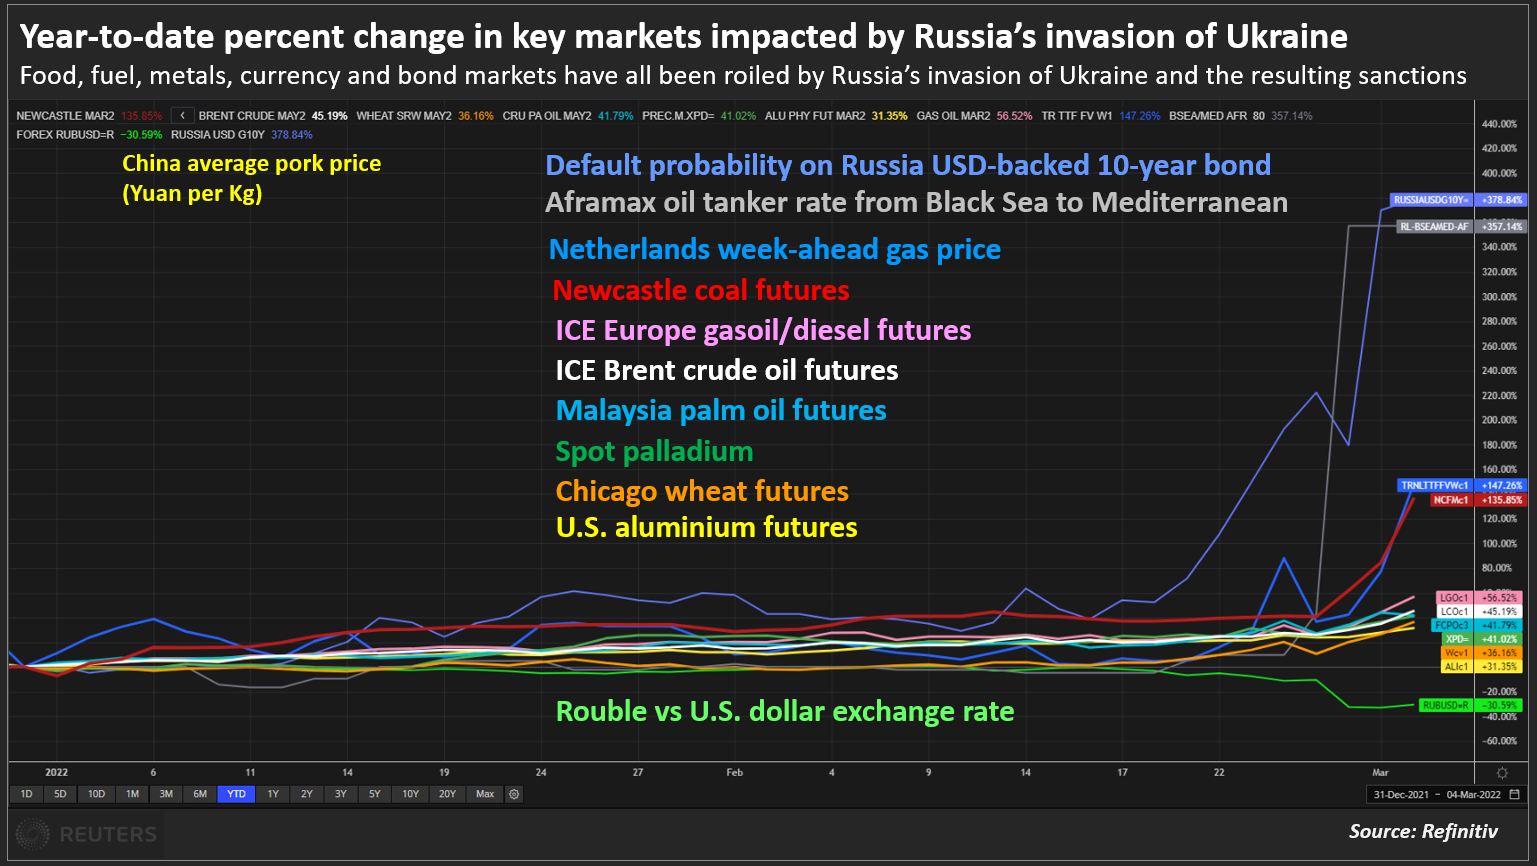 Year-to-date percent change in key markets impacted by Russia’s invasion of Ukraine